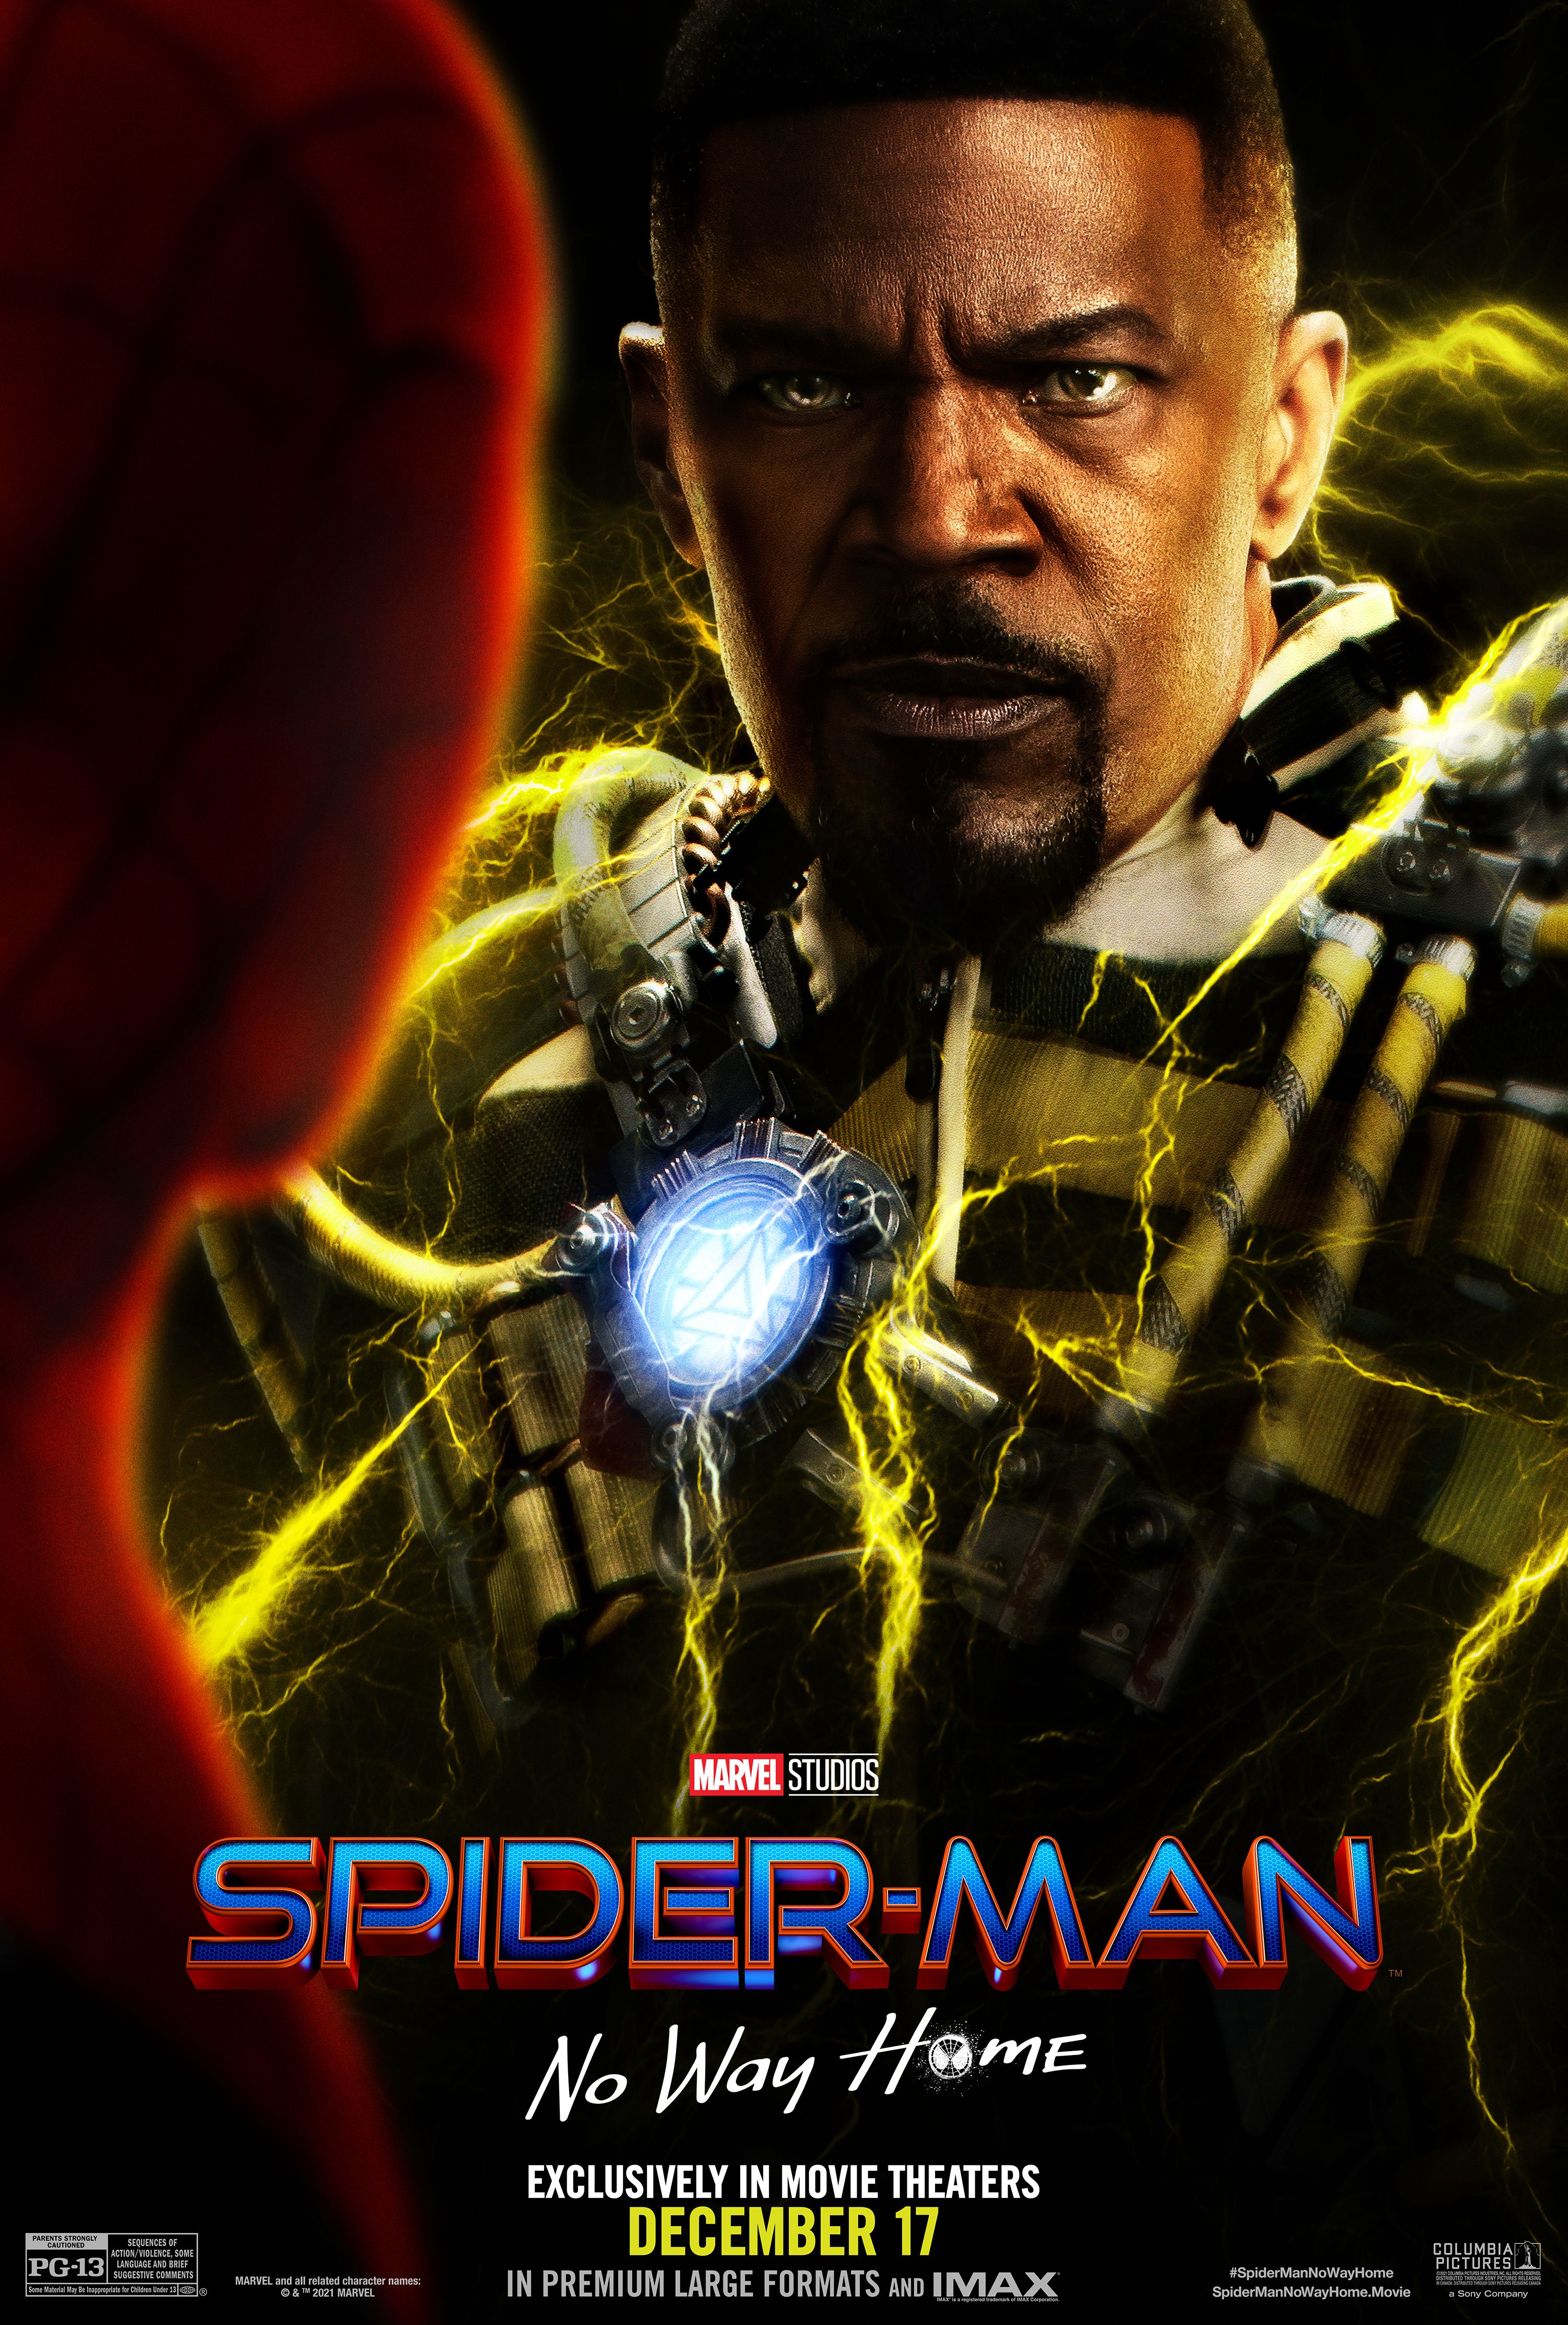 Electro character poster for Spider-Man: No Way Home